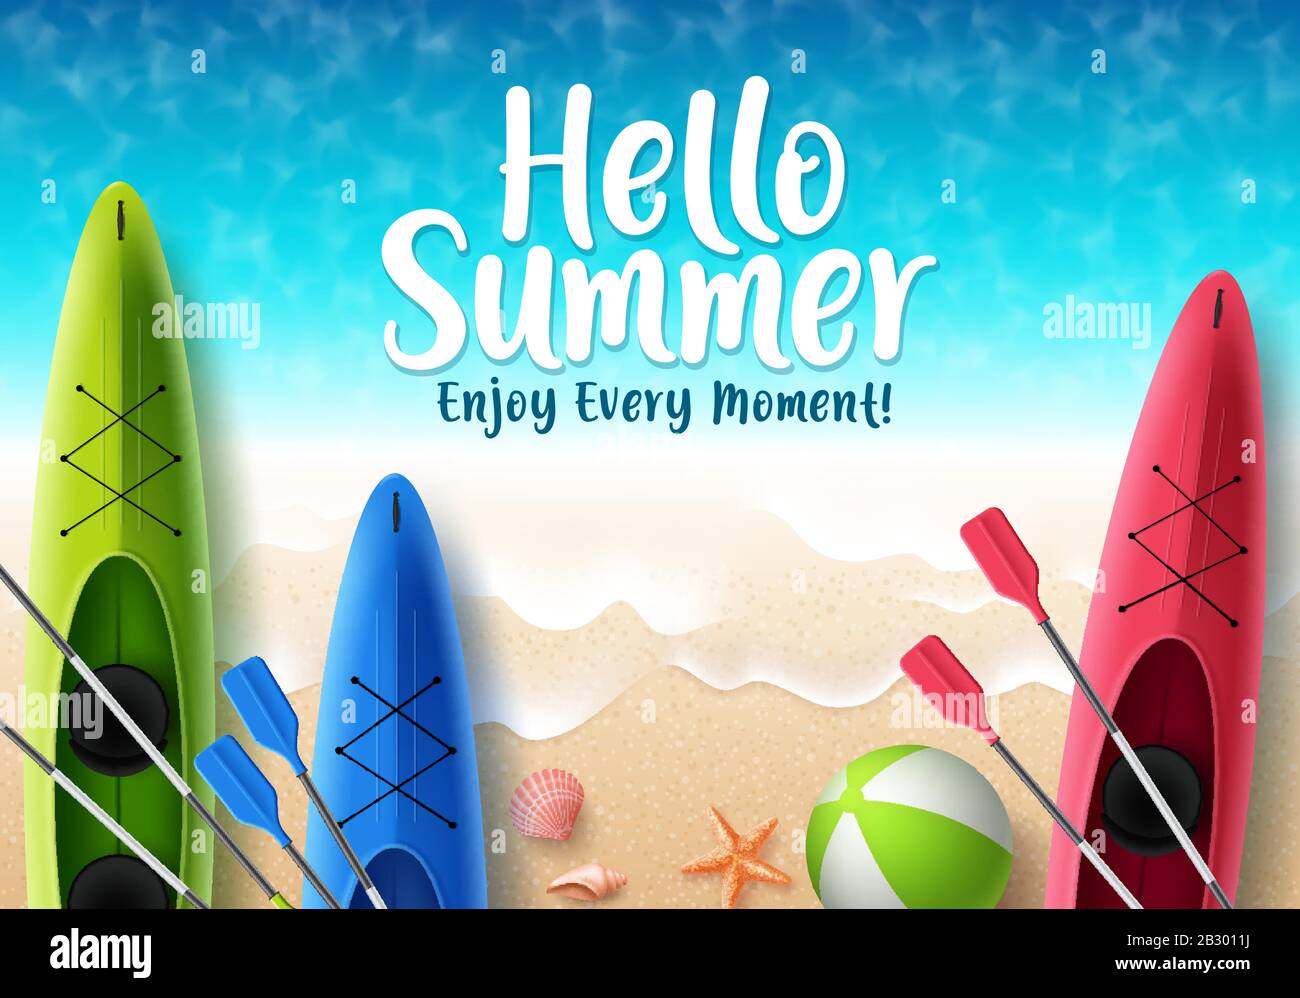 Hello summer vector banner design. Hello summer text with colorful kayak boat and beach elements like beach ball and seashells in seaside top view Stock Vector